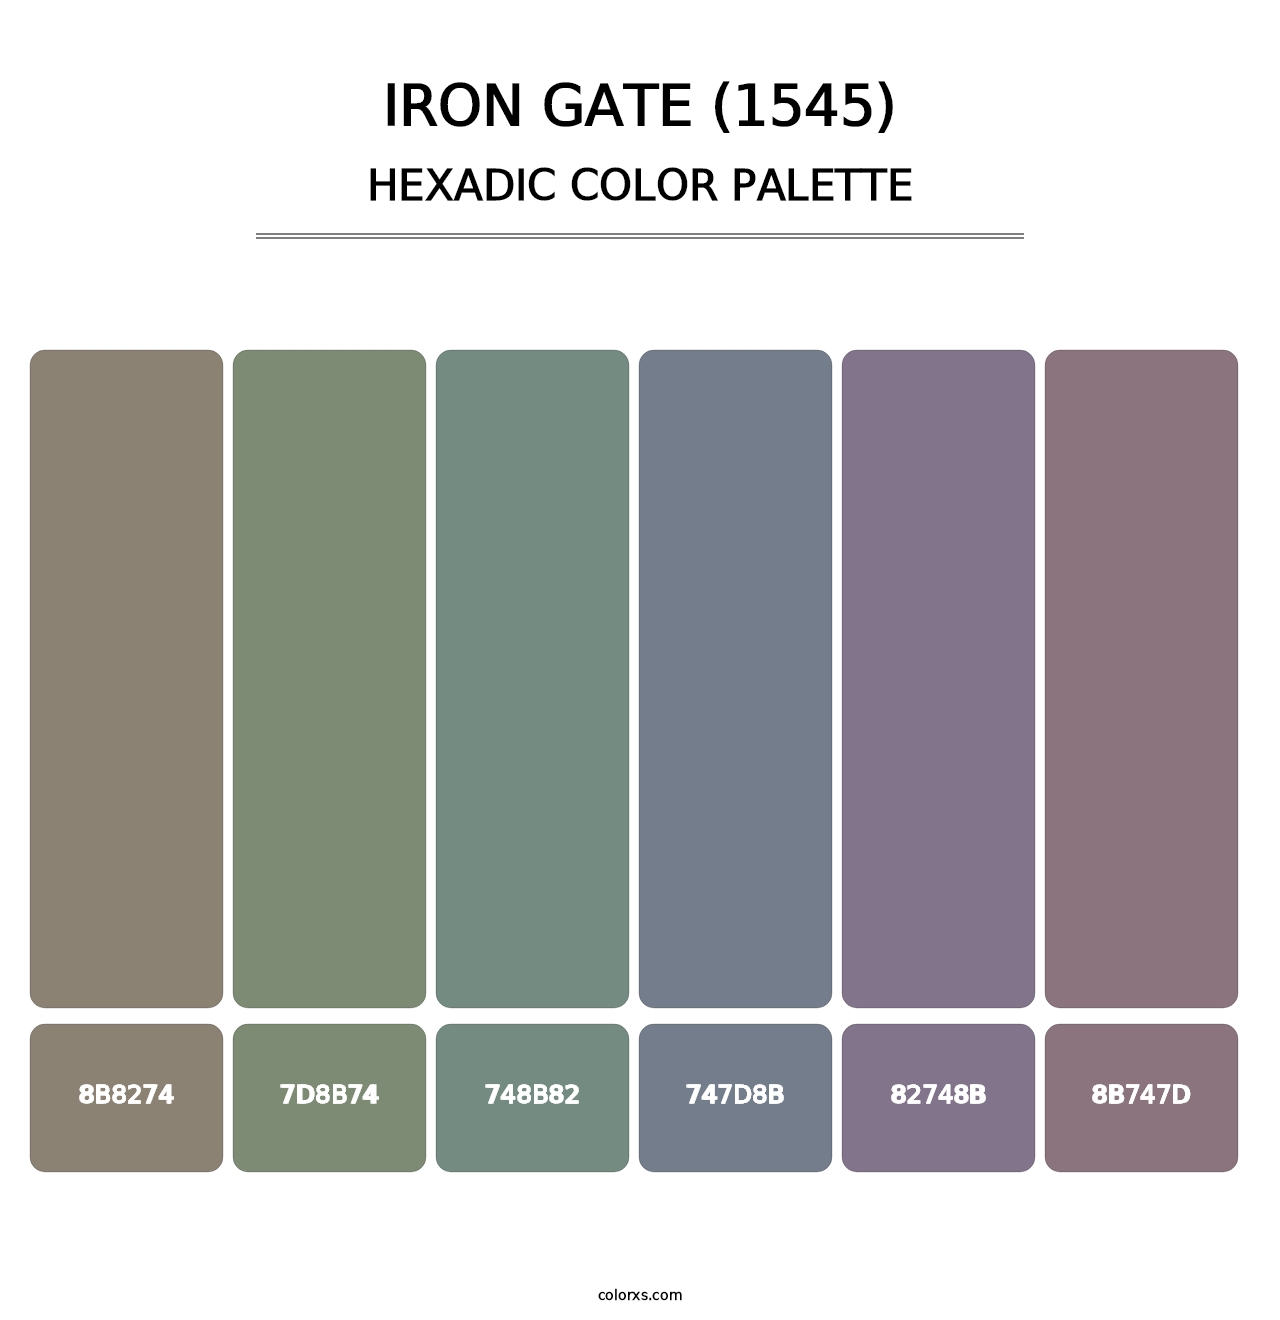 Iron Gate (1545) - Hexadic Color Palette